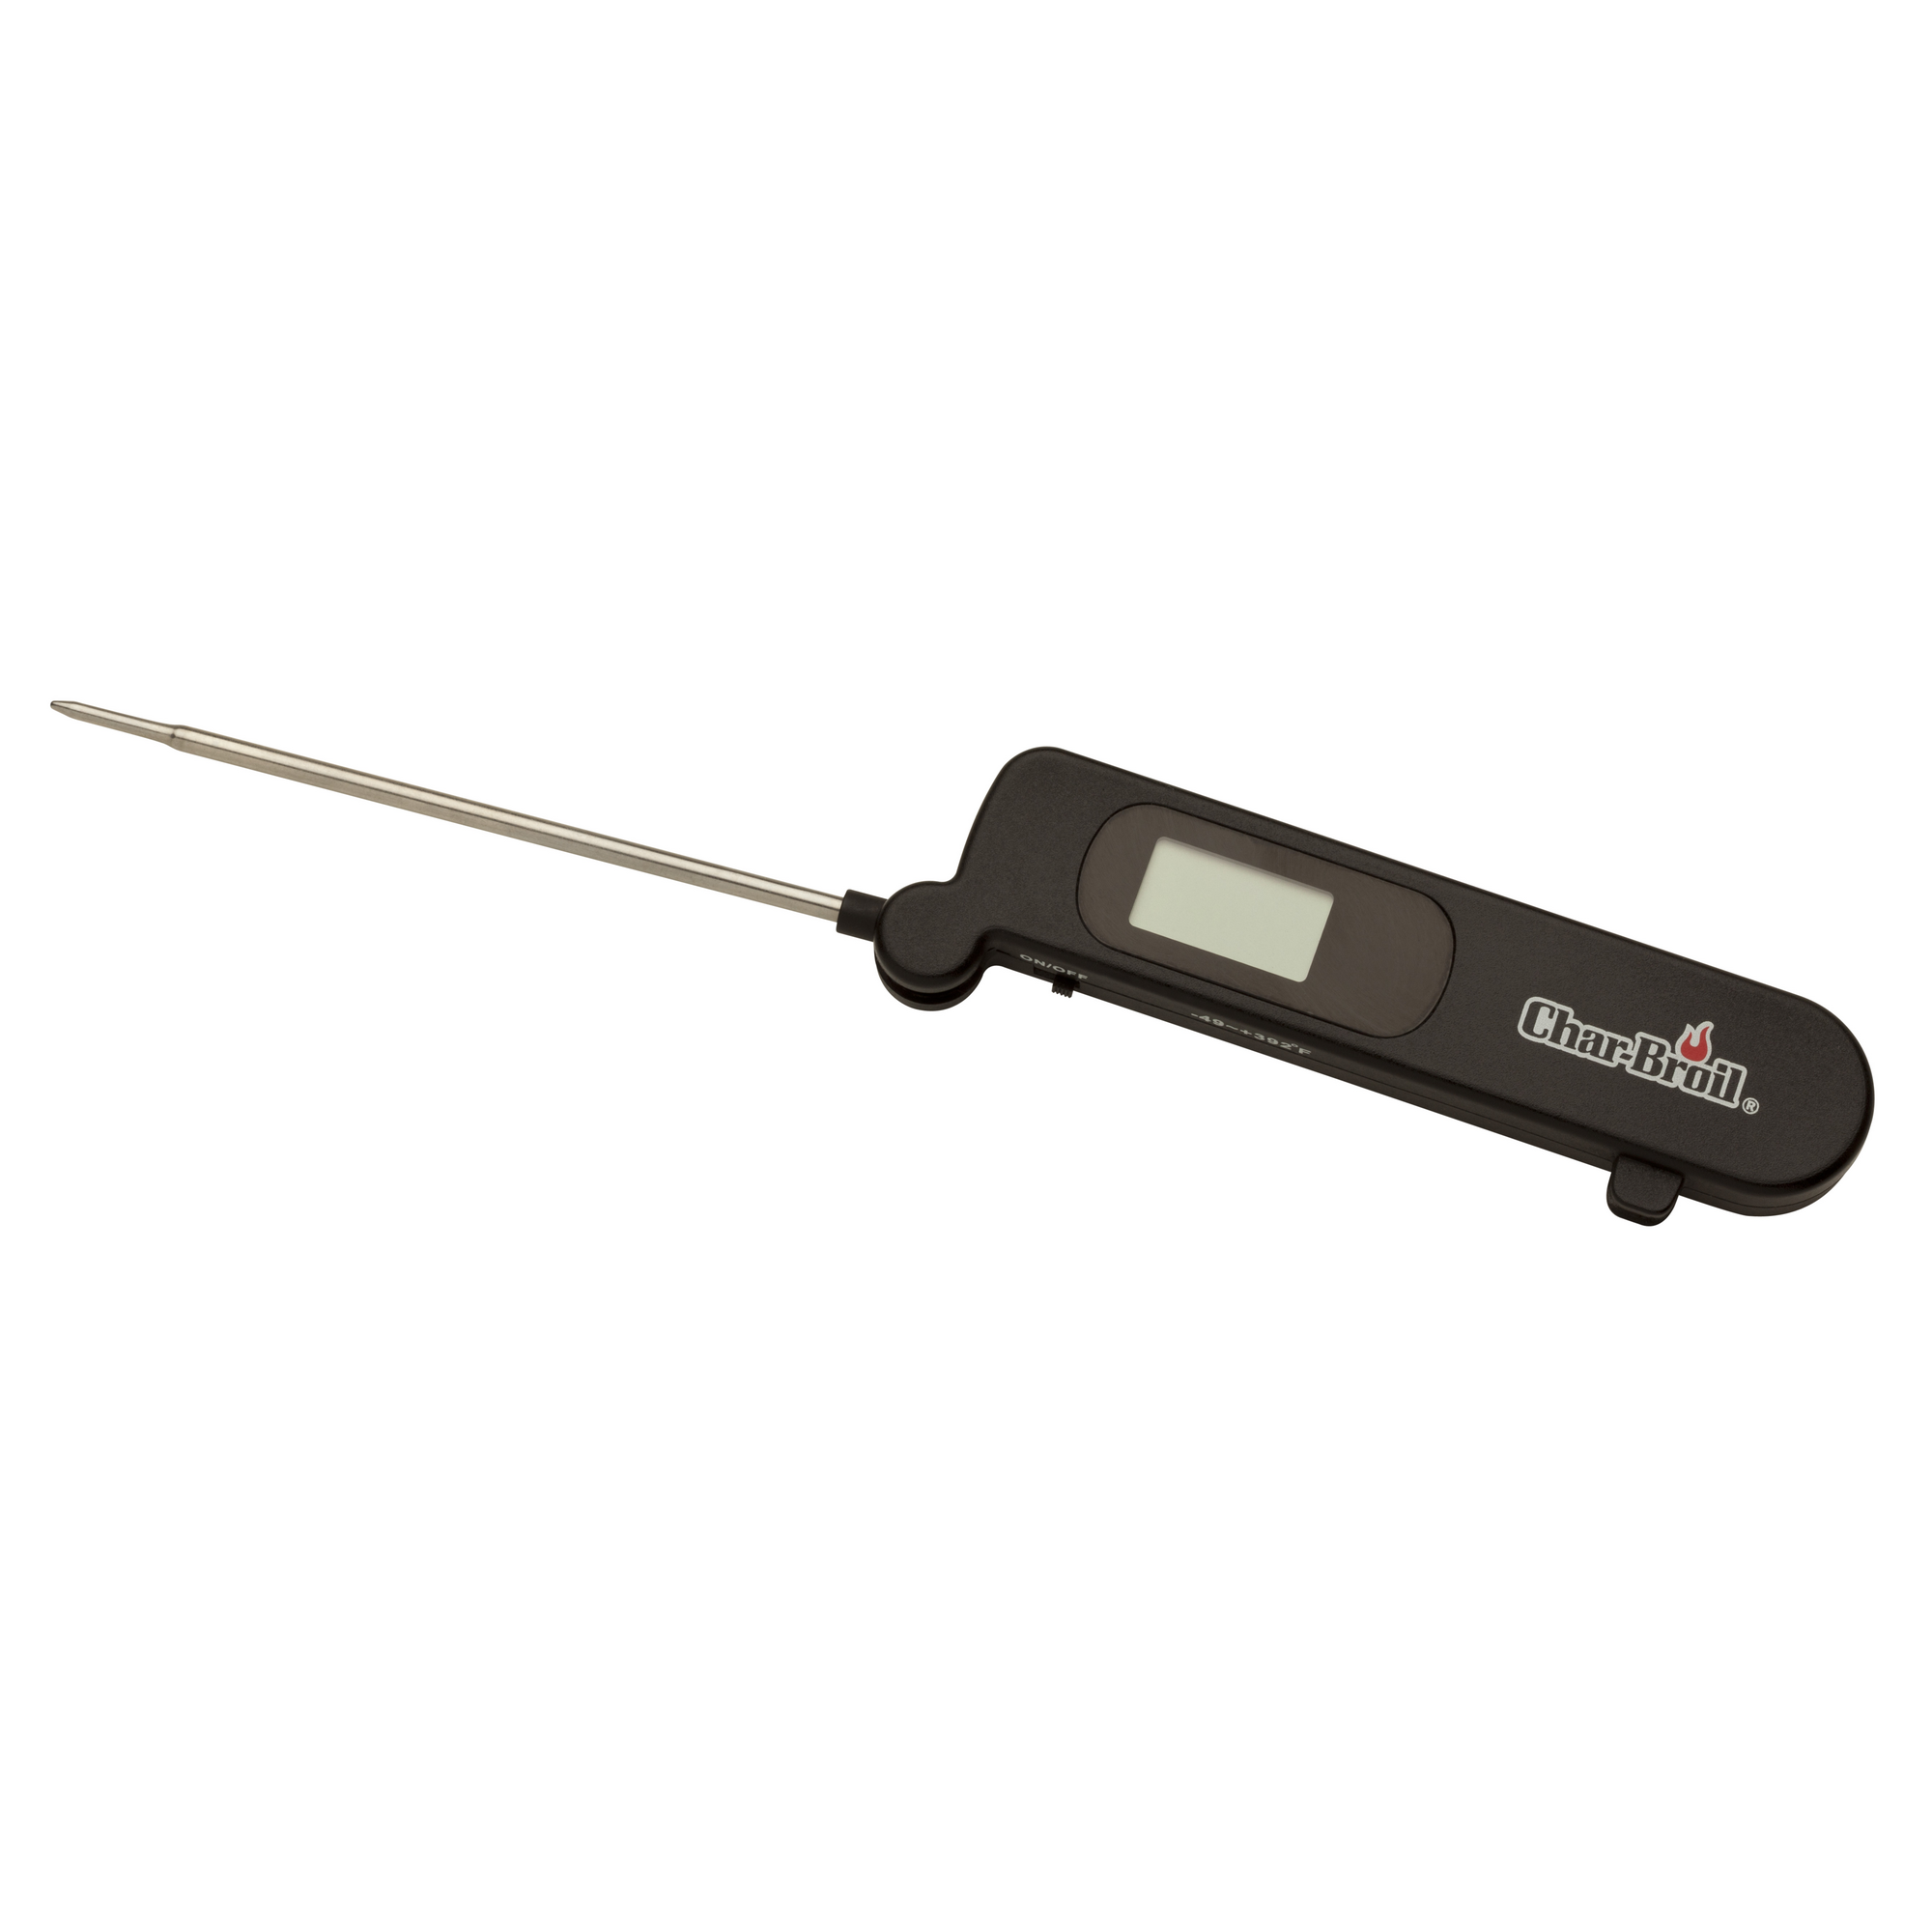 Digitalthermometer schwarz, mit LCD-Display + product picture